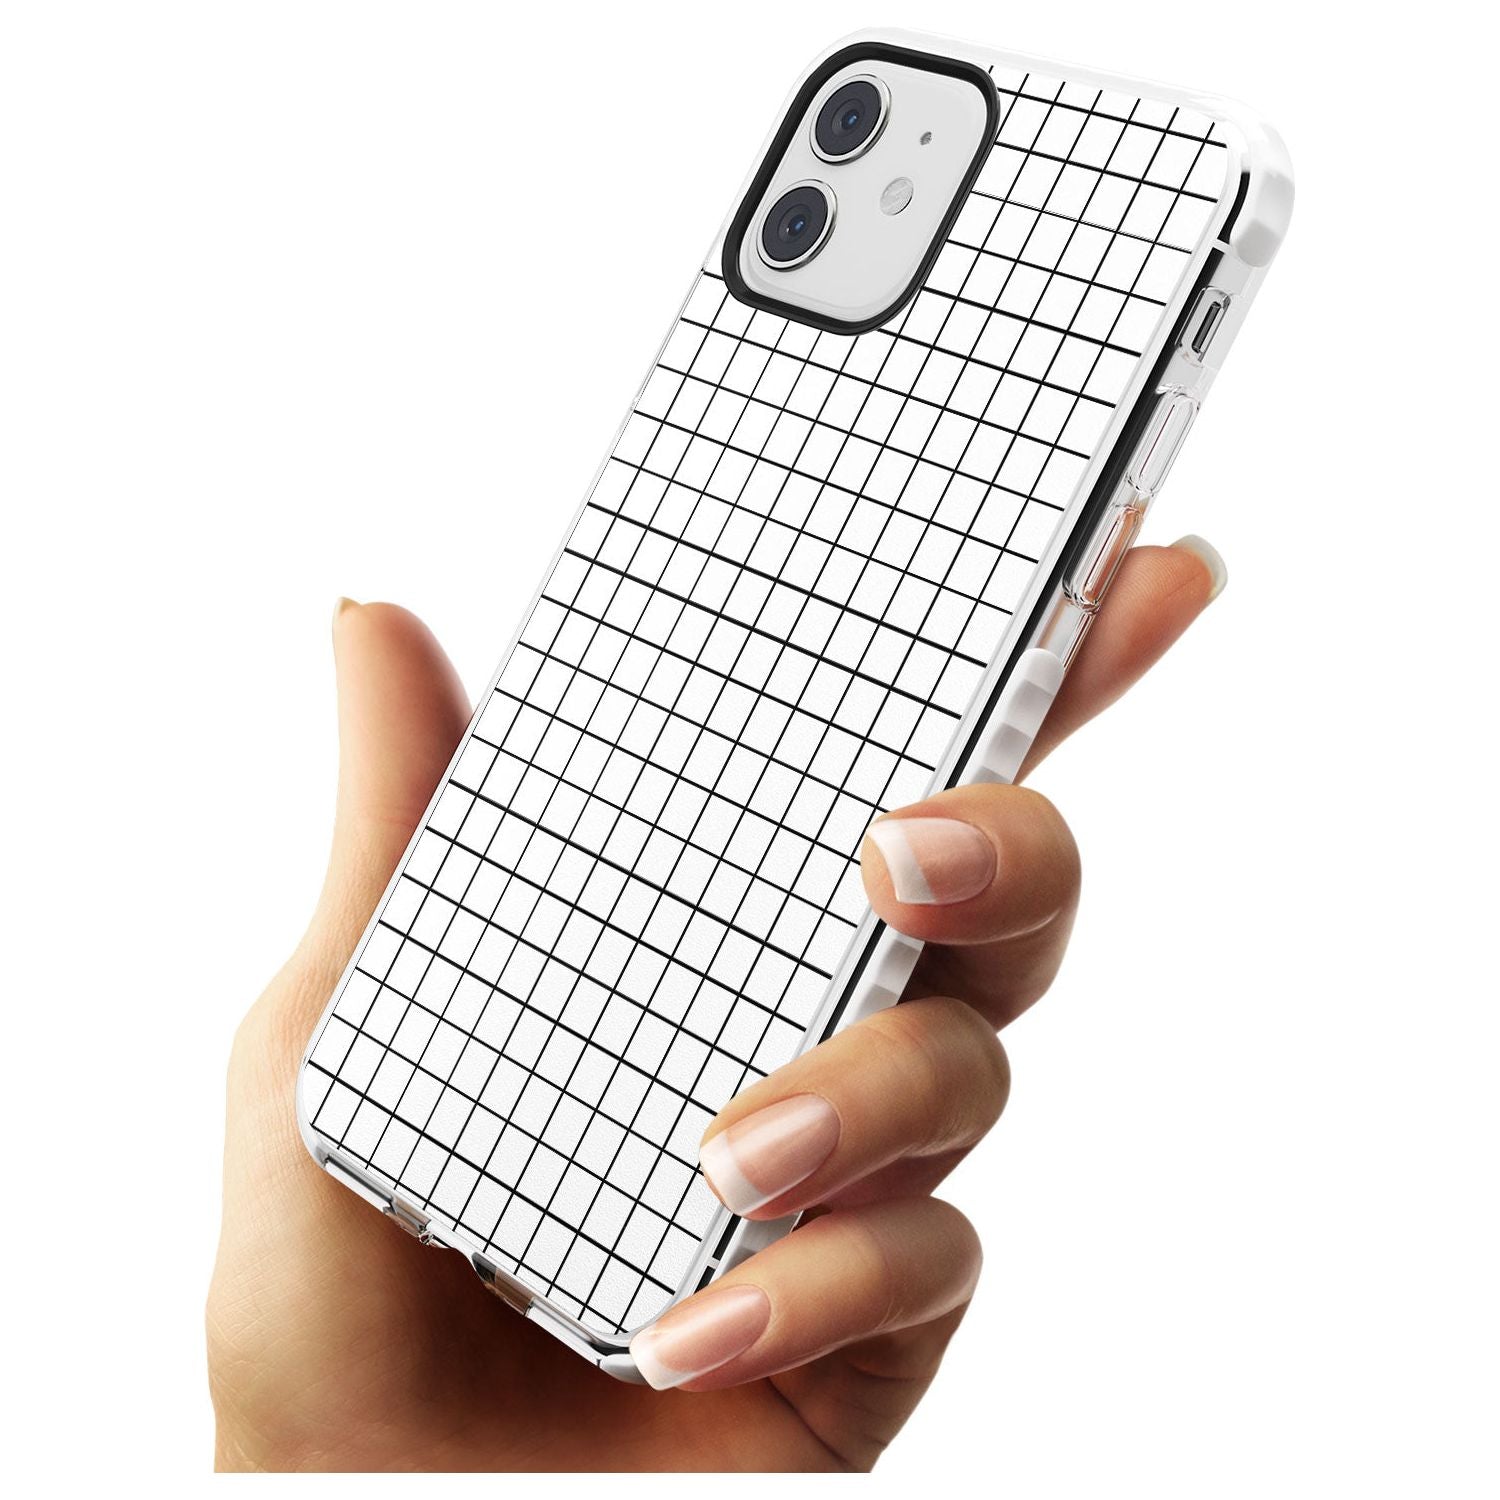 Simplistic Small Grid Designs White Impact Phone Case for iPhone 11